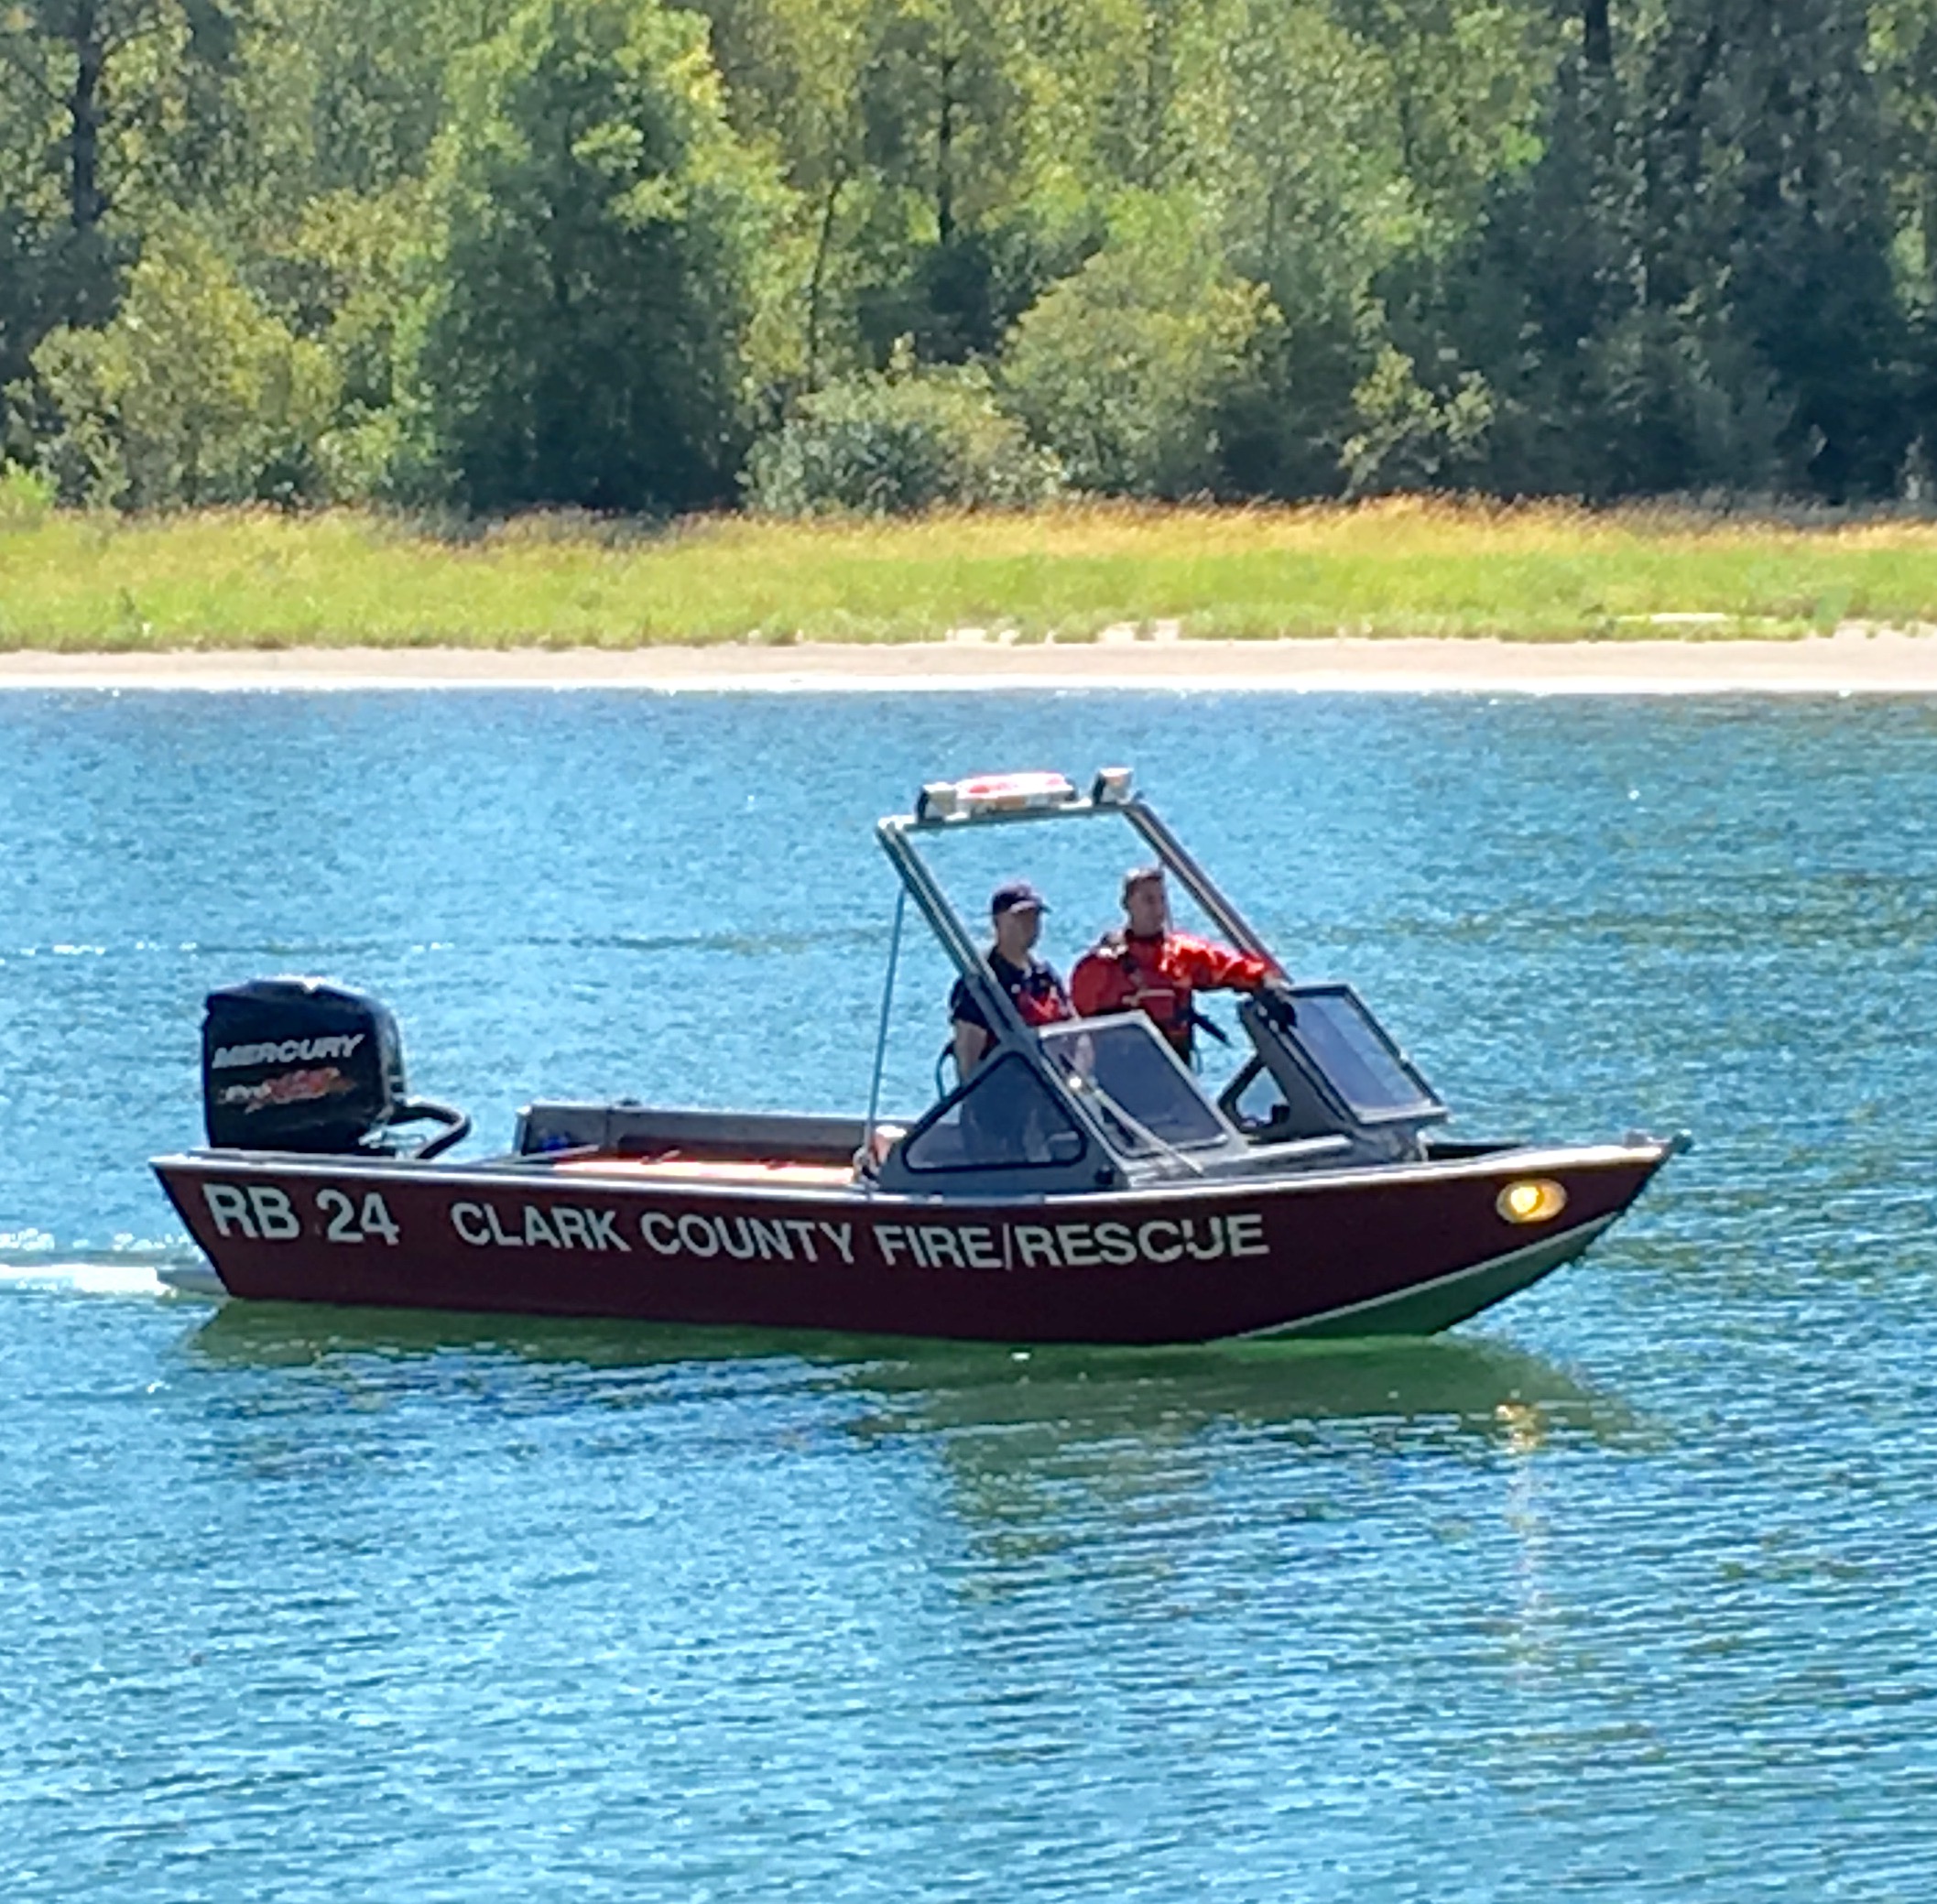 Clark County Fire & Rescue responds to a call about a body found in the Lewis River Friday morning. Officials recovered an elderly woman's body, and the Cowlitz County coroner and sheriff's office are investigating.